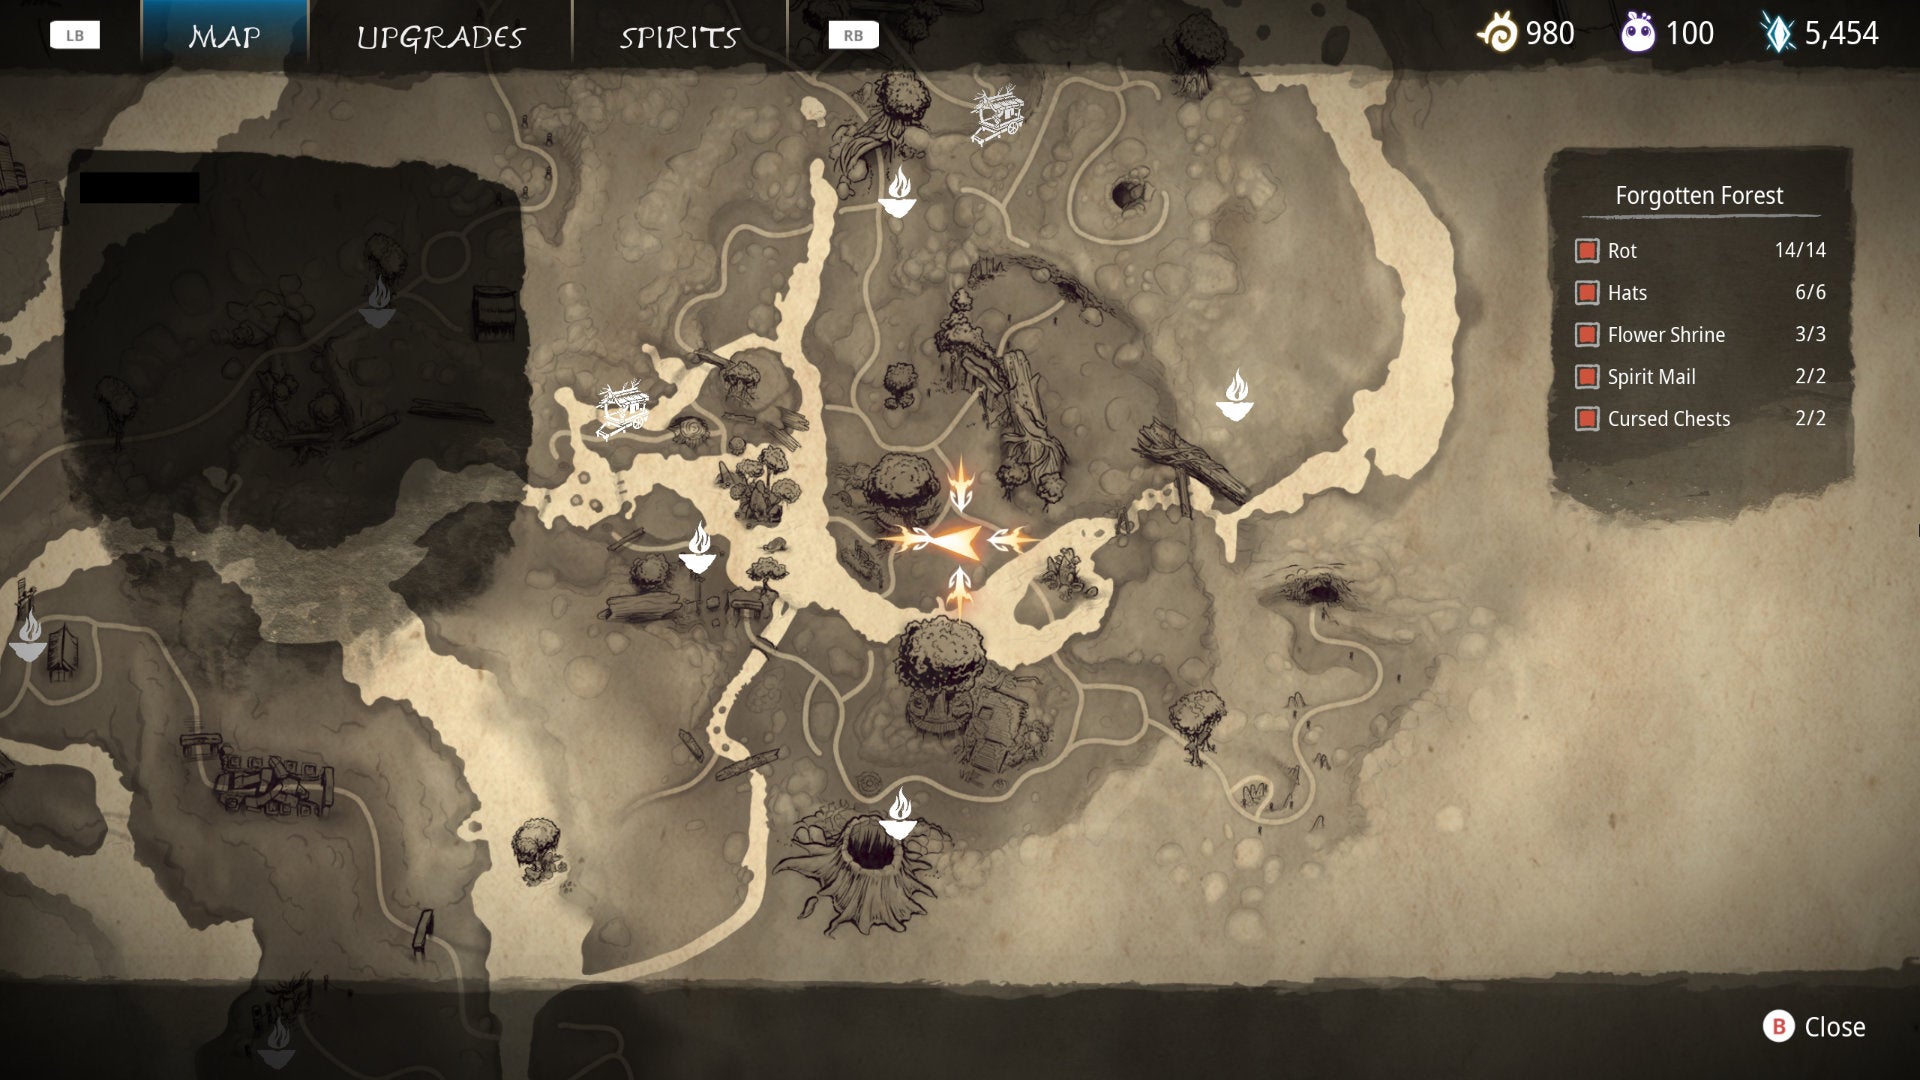 Part of the map of Kena: Bridge Of Spirits where a Spirit Mail collectible is hidden nearby.